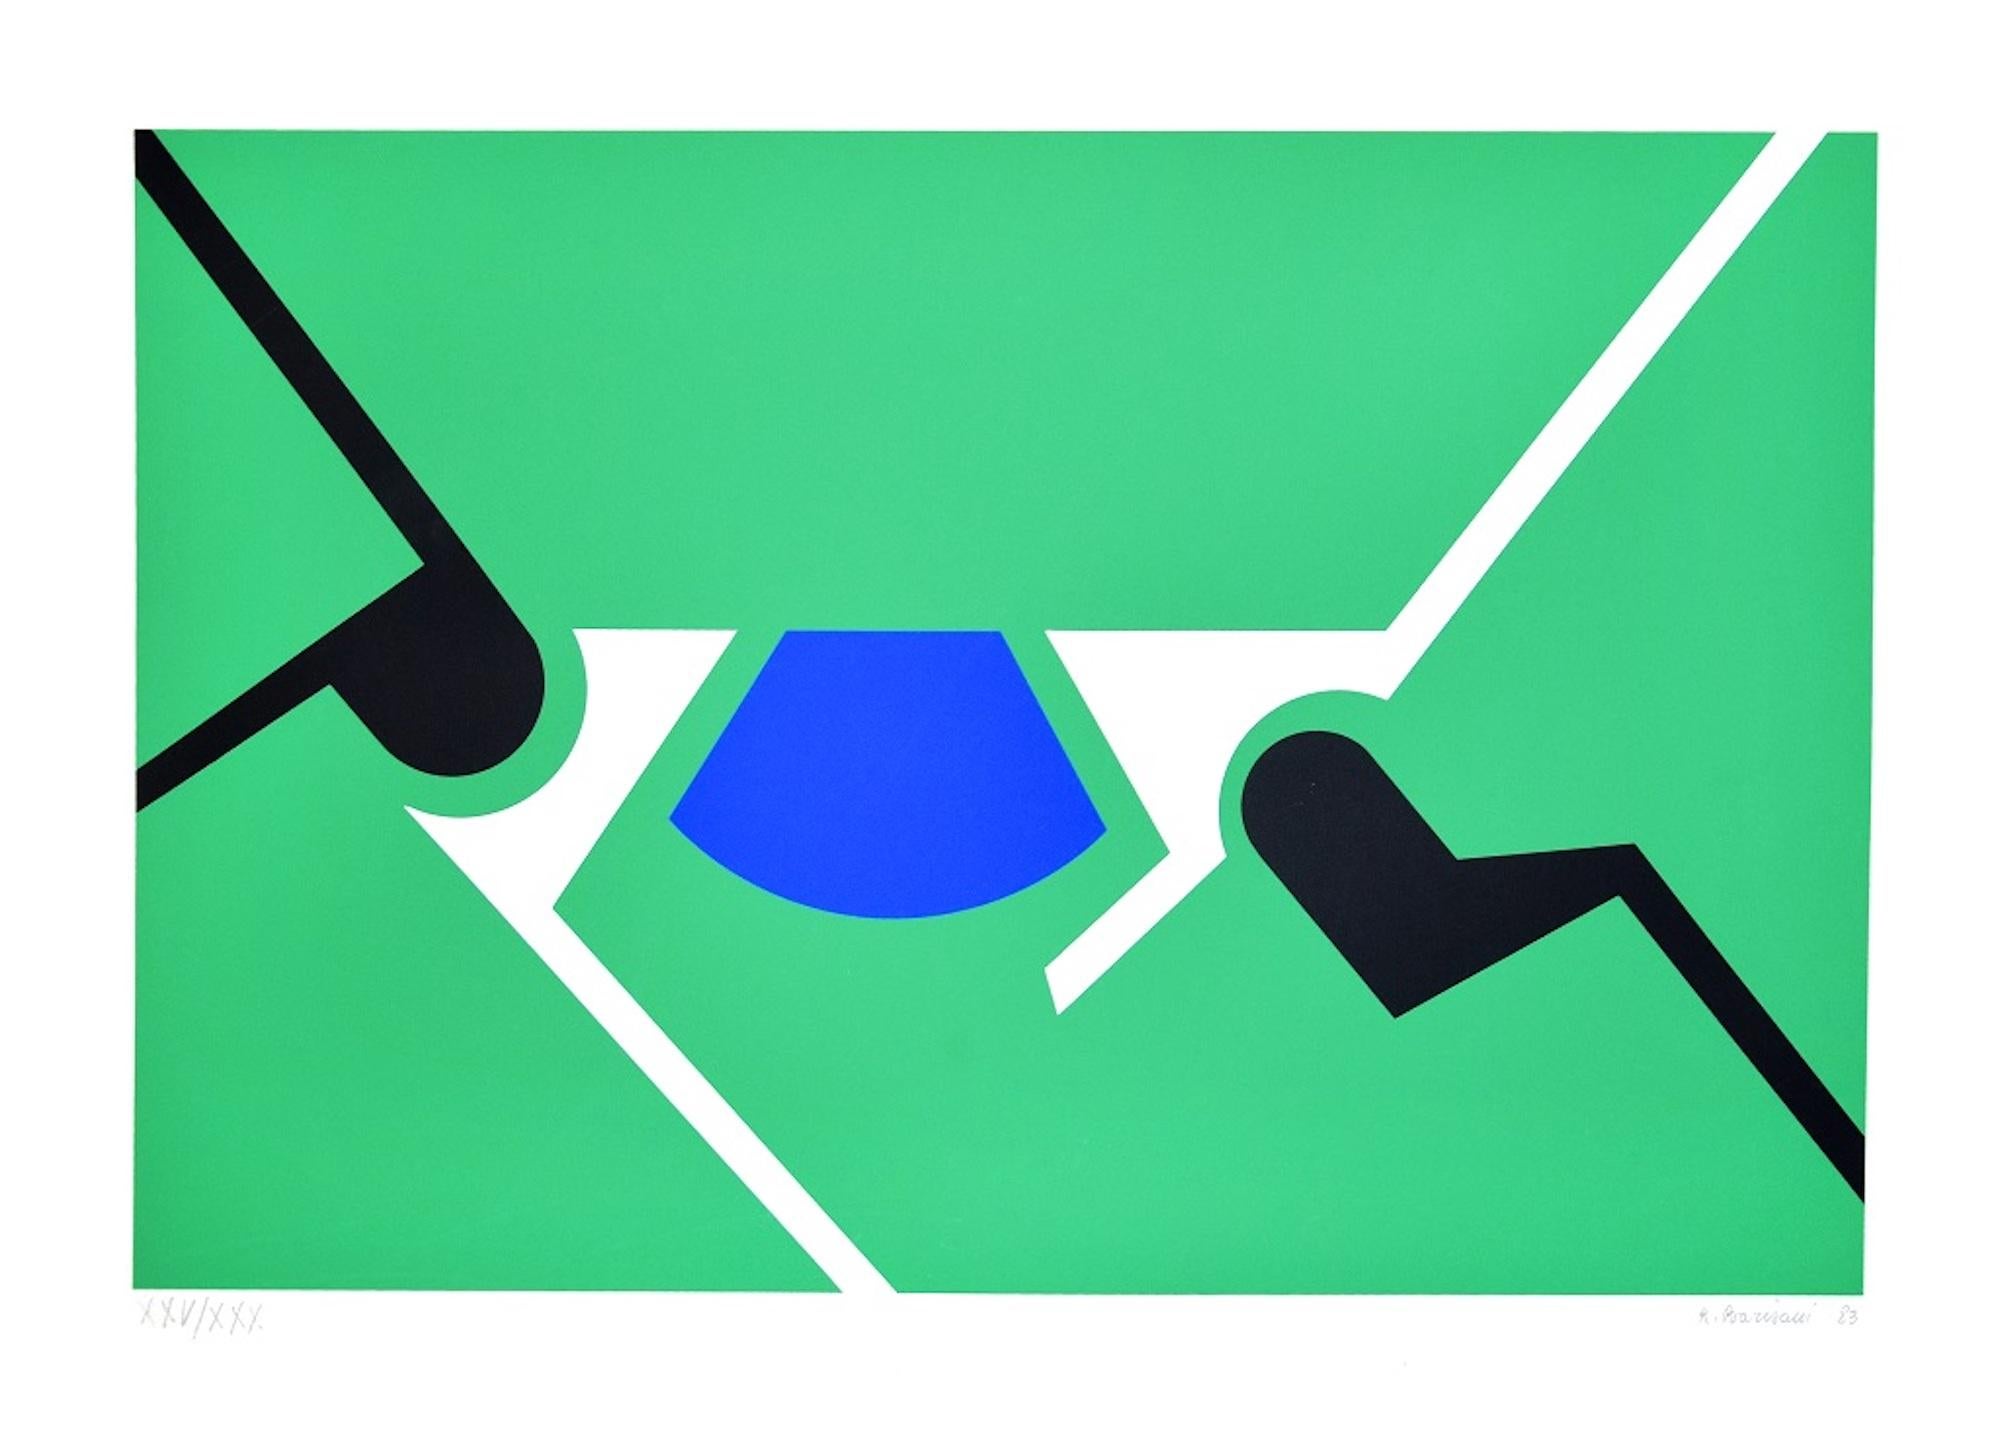 Green Shapes is an original colored screen print realized by Renato Barisani in 1983.

Hand-signed and dated in pencil on the lower right. Numbered in pencil on the lower left. Edition XXV/XXX.

Good conditions.

This screen print represents a